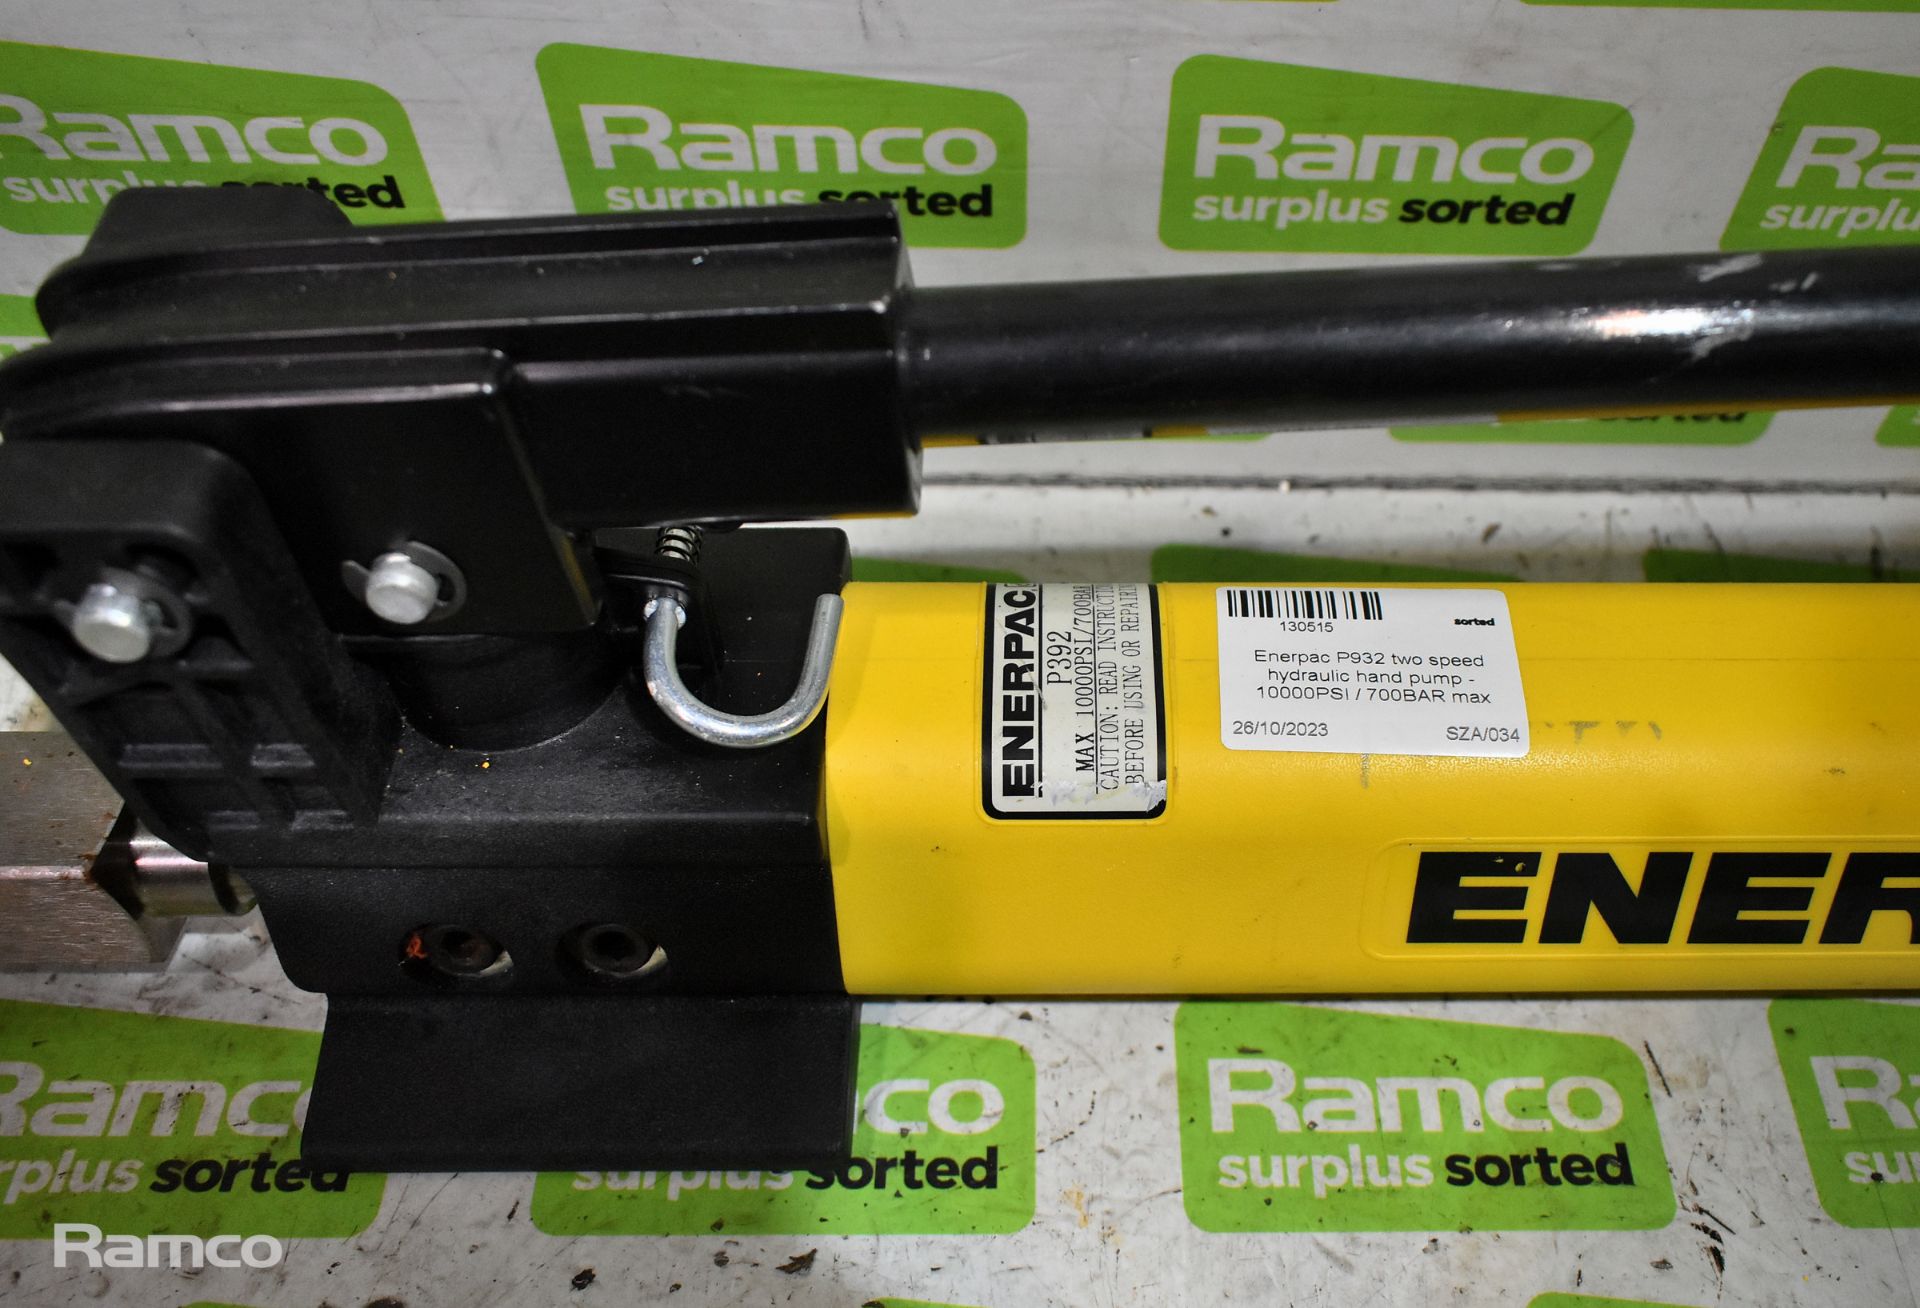 Enerpac P932 two speed hydraulic hand pump - 10000 PSI / 700 BAR max - Image 3 of 6